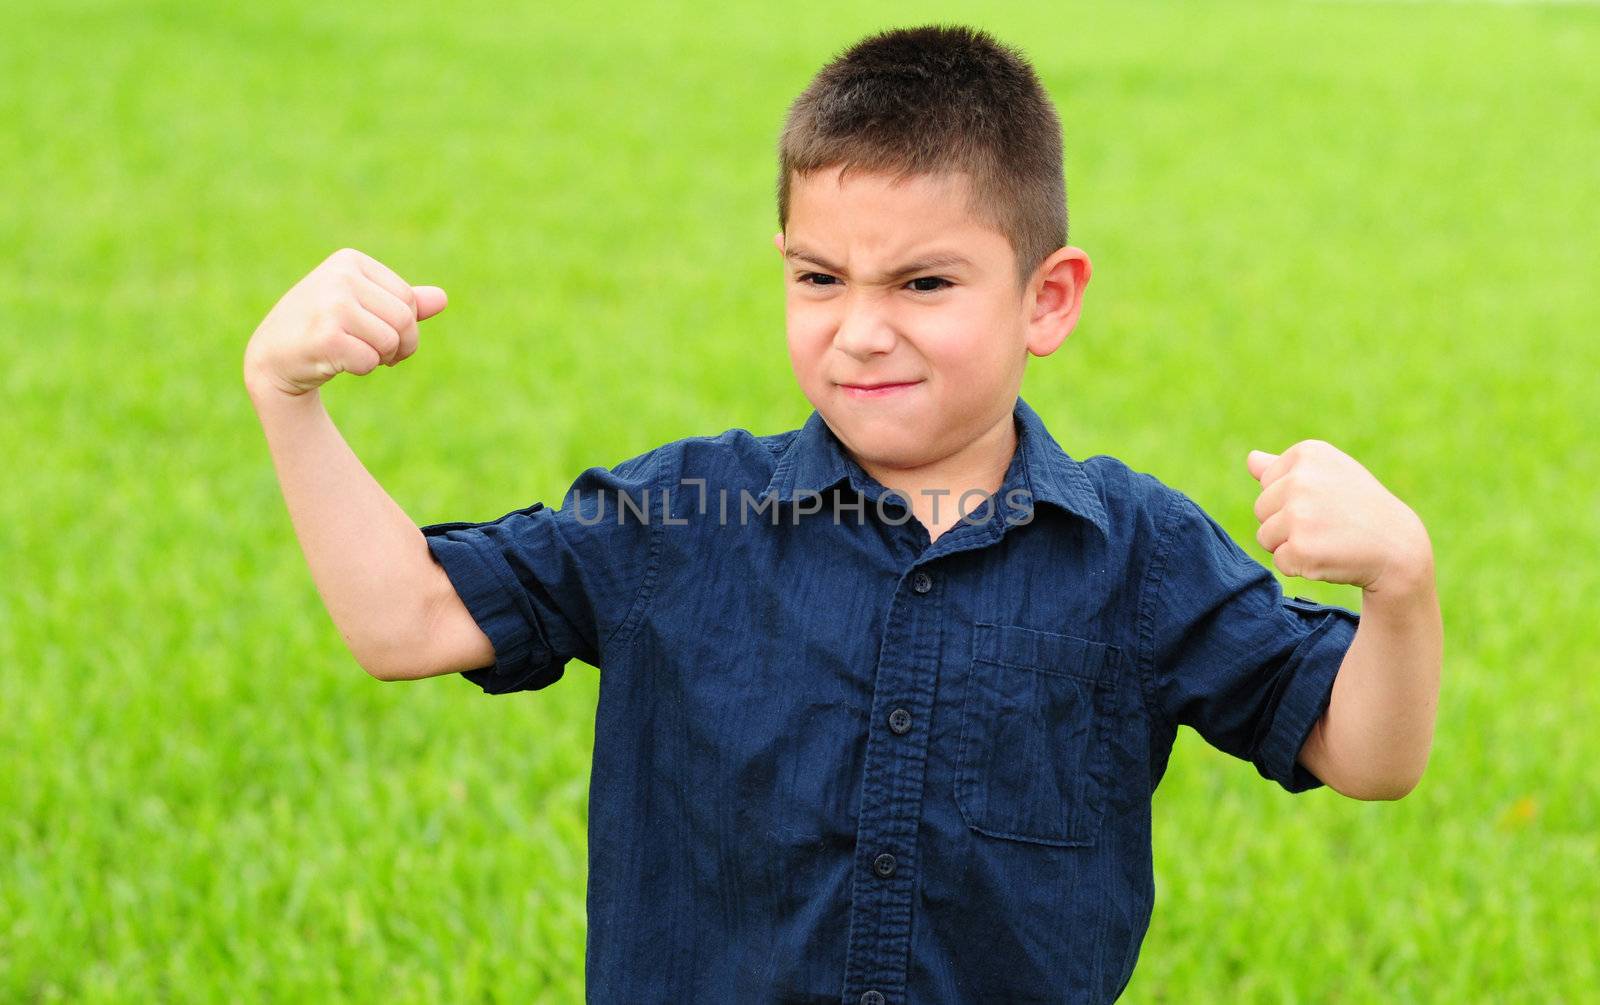 Young boy who is flexing his muscles with a mean face